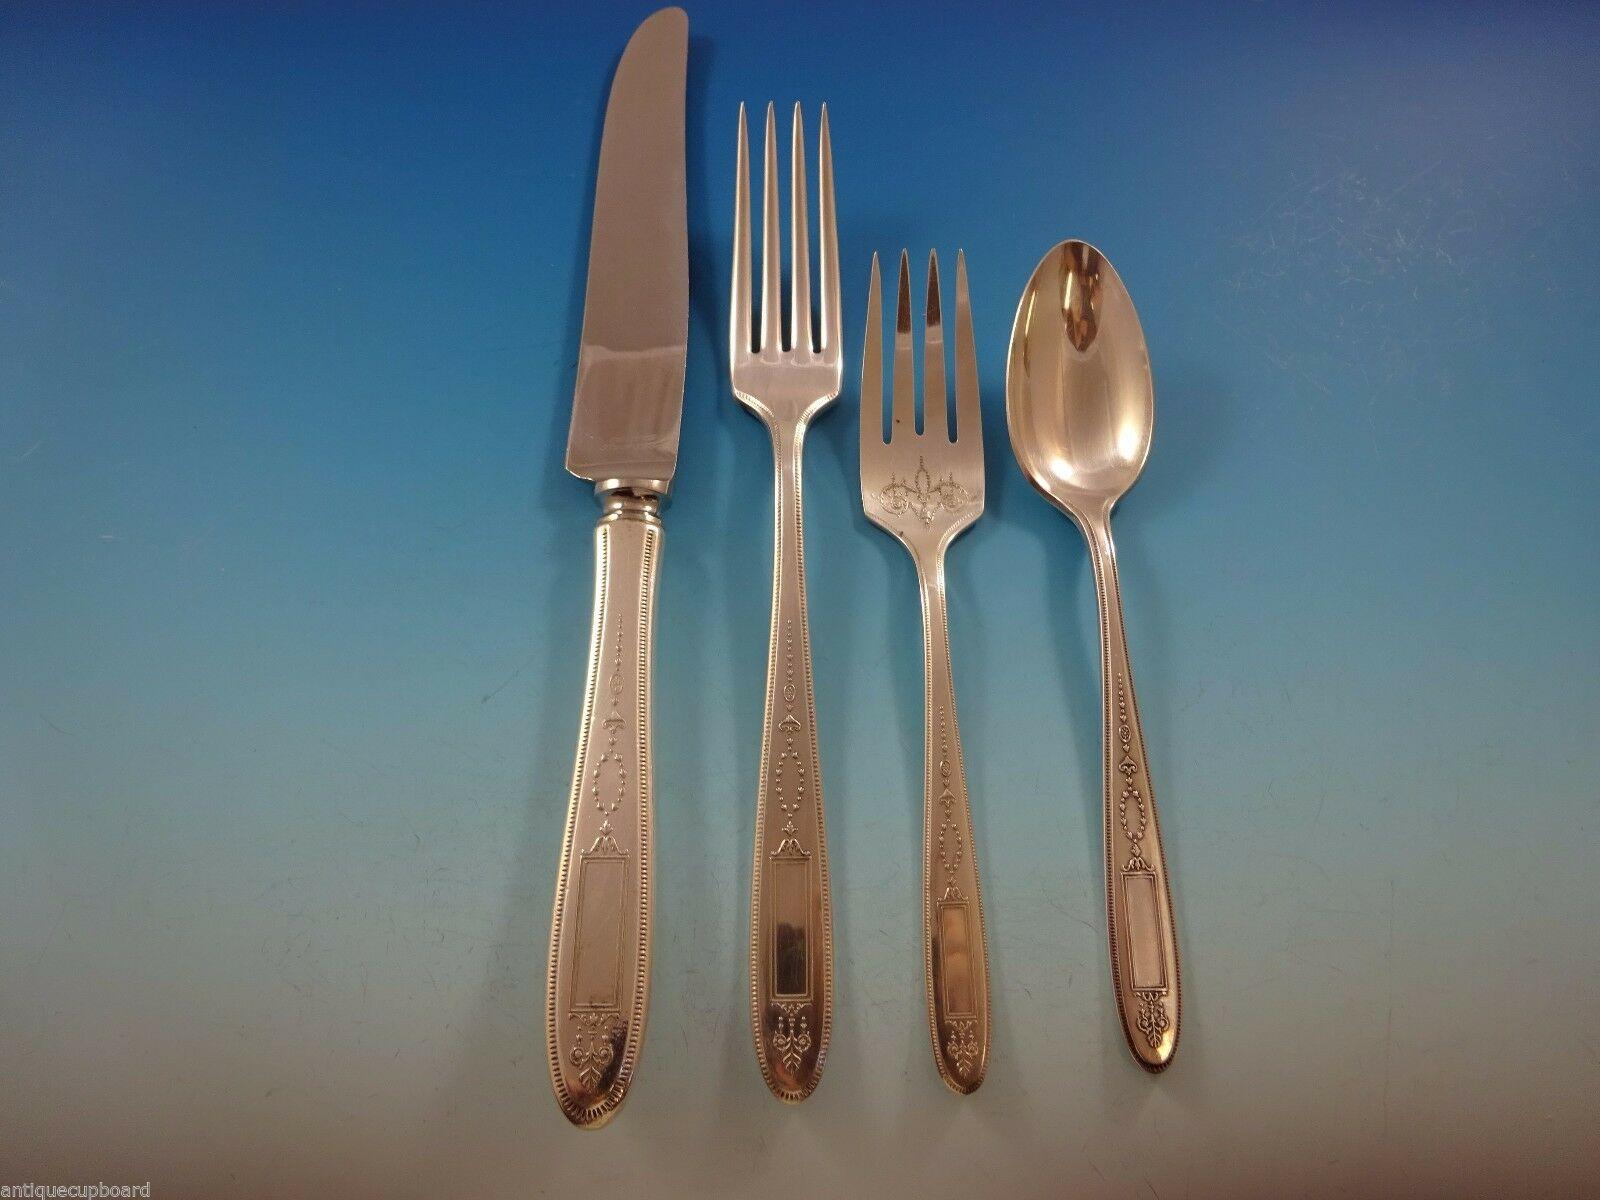 Grosvenor by Community plate silver plate flatware set, 80 pieces. This set includes:

12 dinner knives, 9 3/4